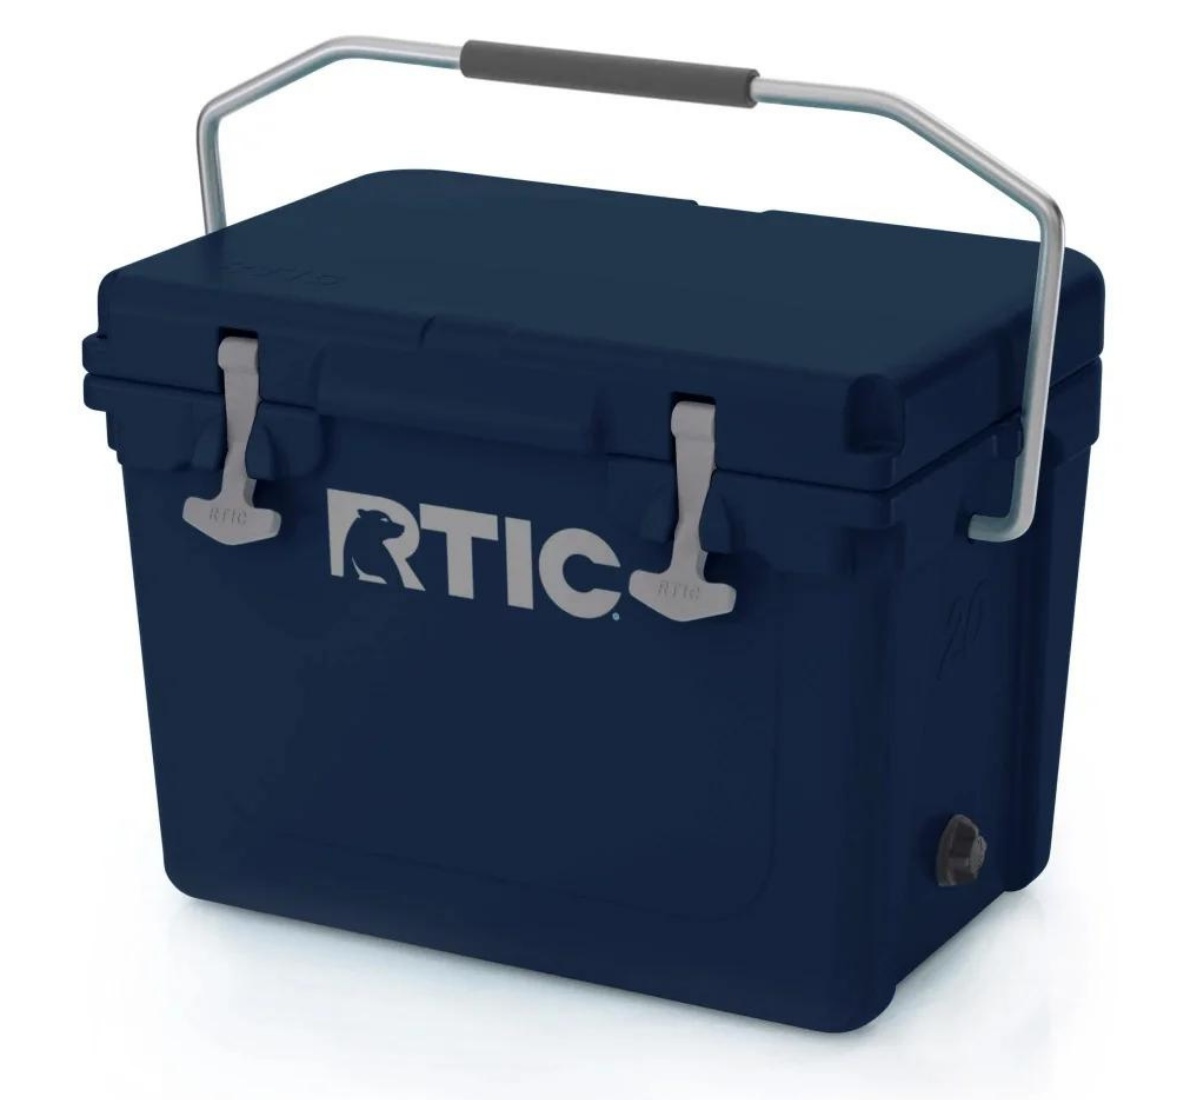 rtic 20 cooler review